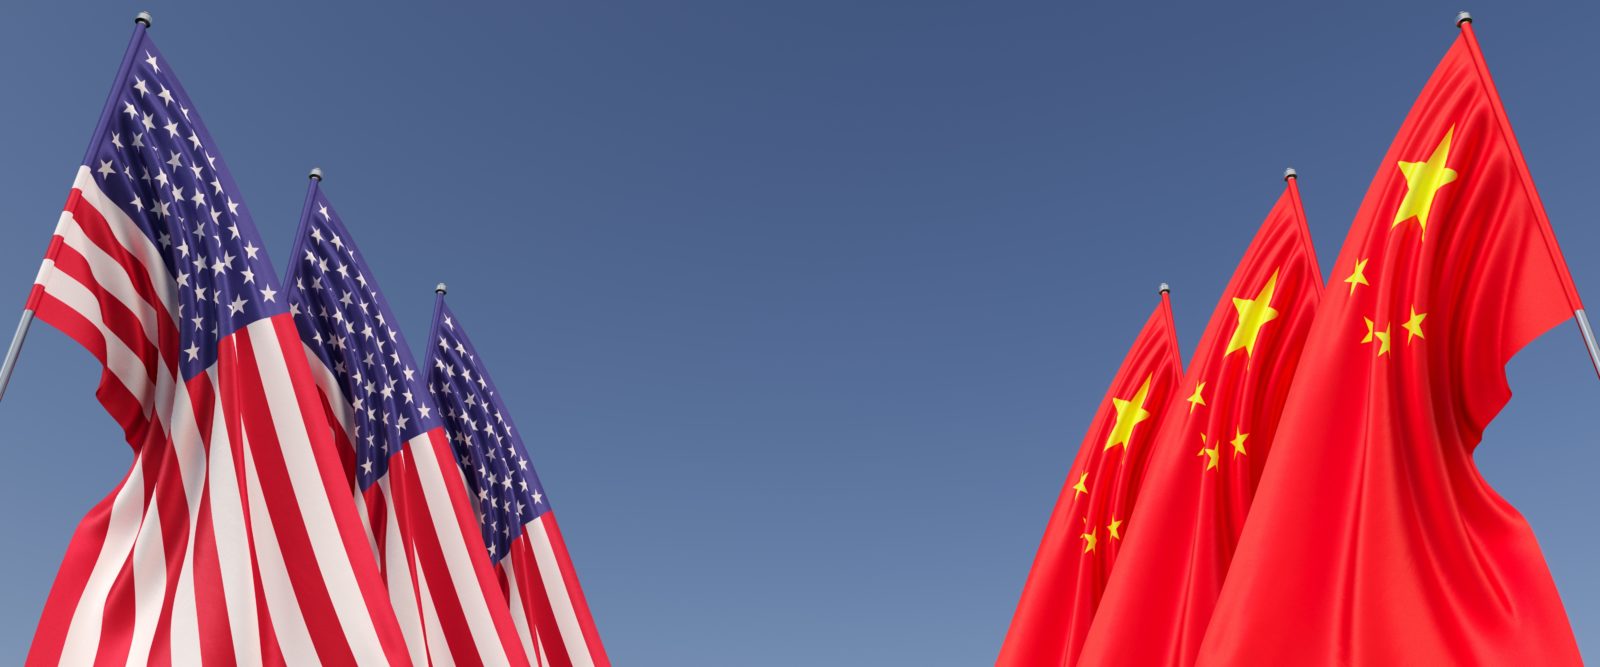 Flags of the United States and China on flagpoles on sides. Six flags on a blue background. America. USA. Washington. Beijing, Hong Kong. 3D illustration.